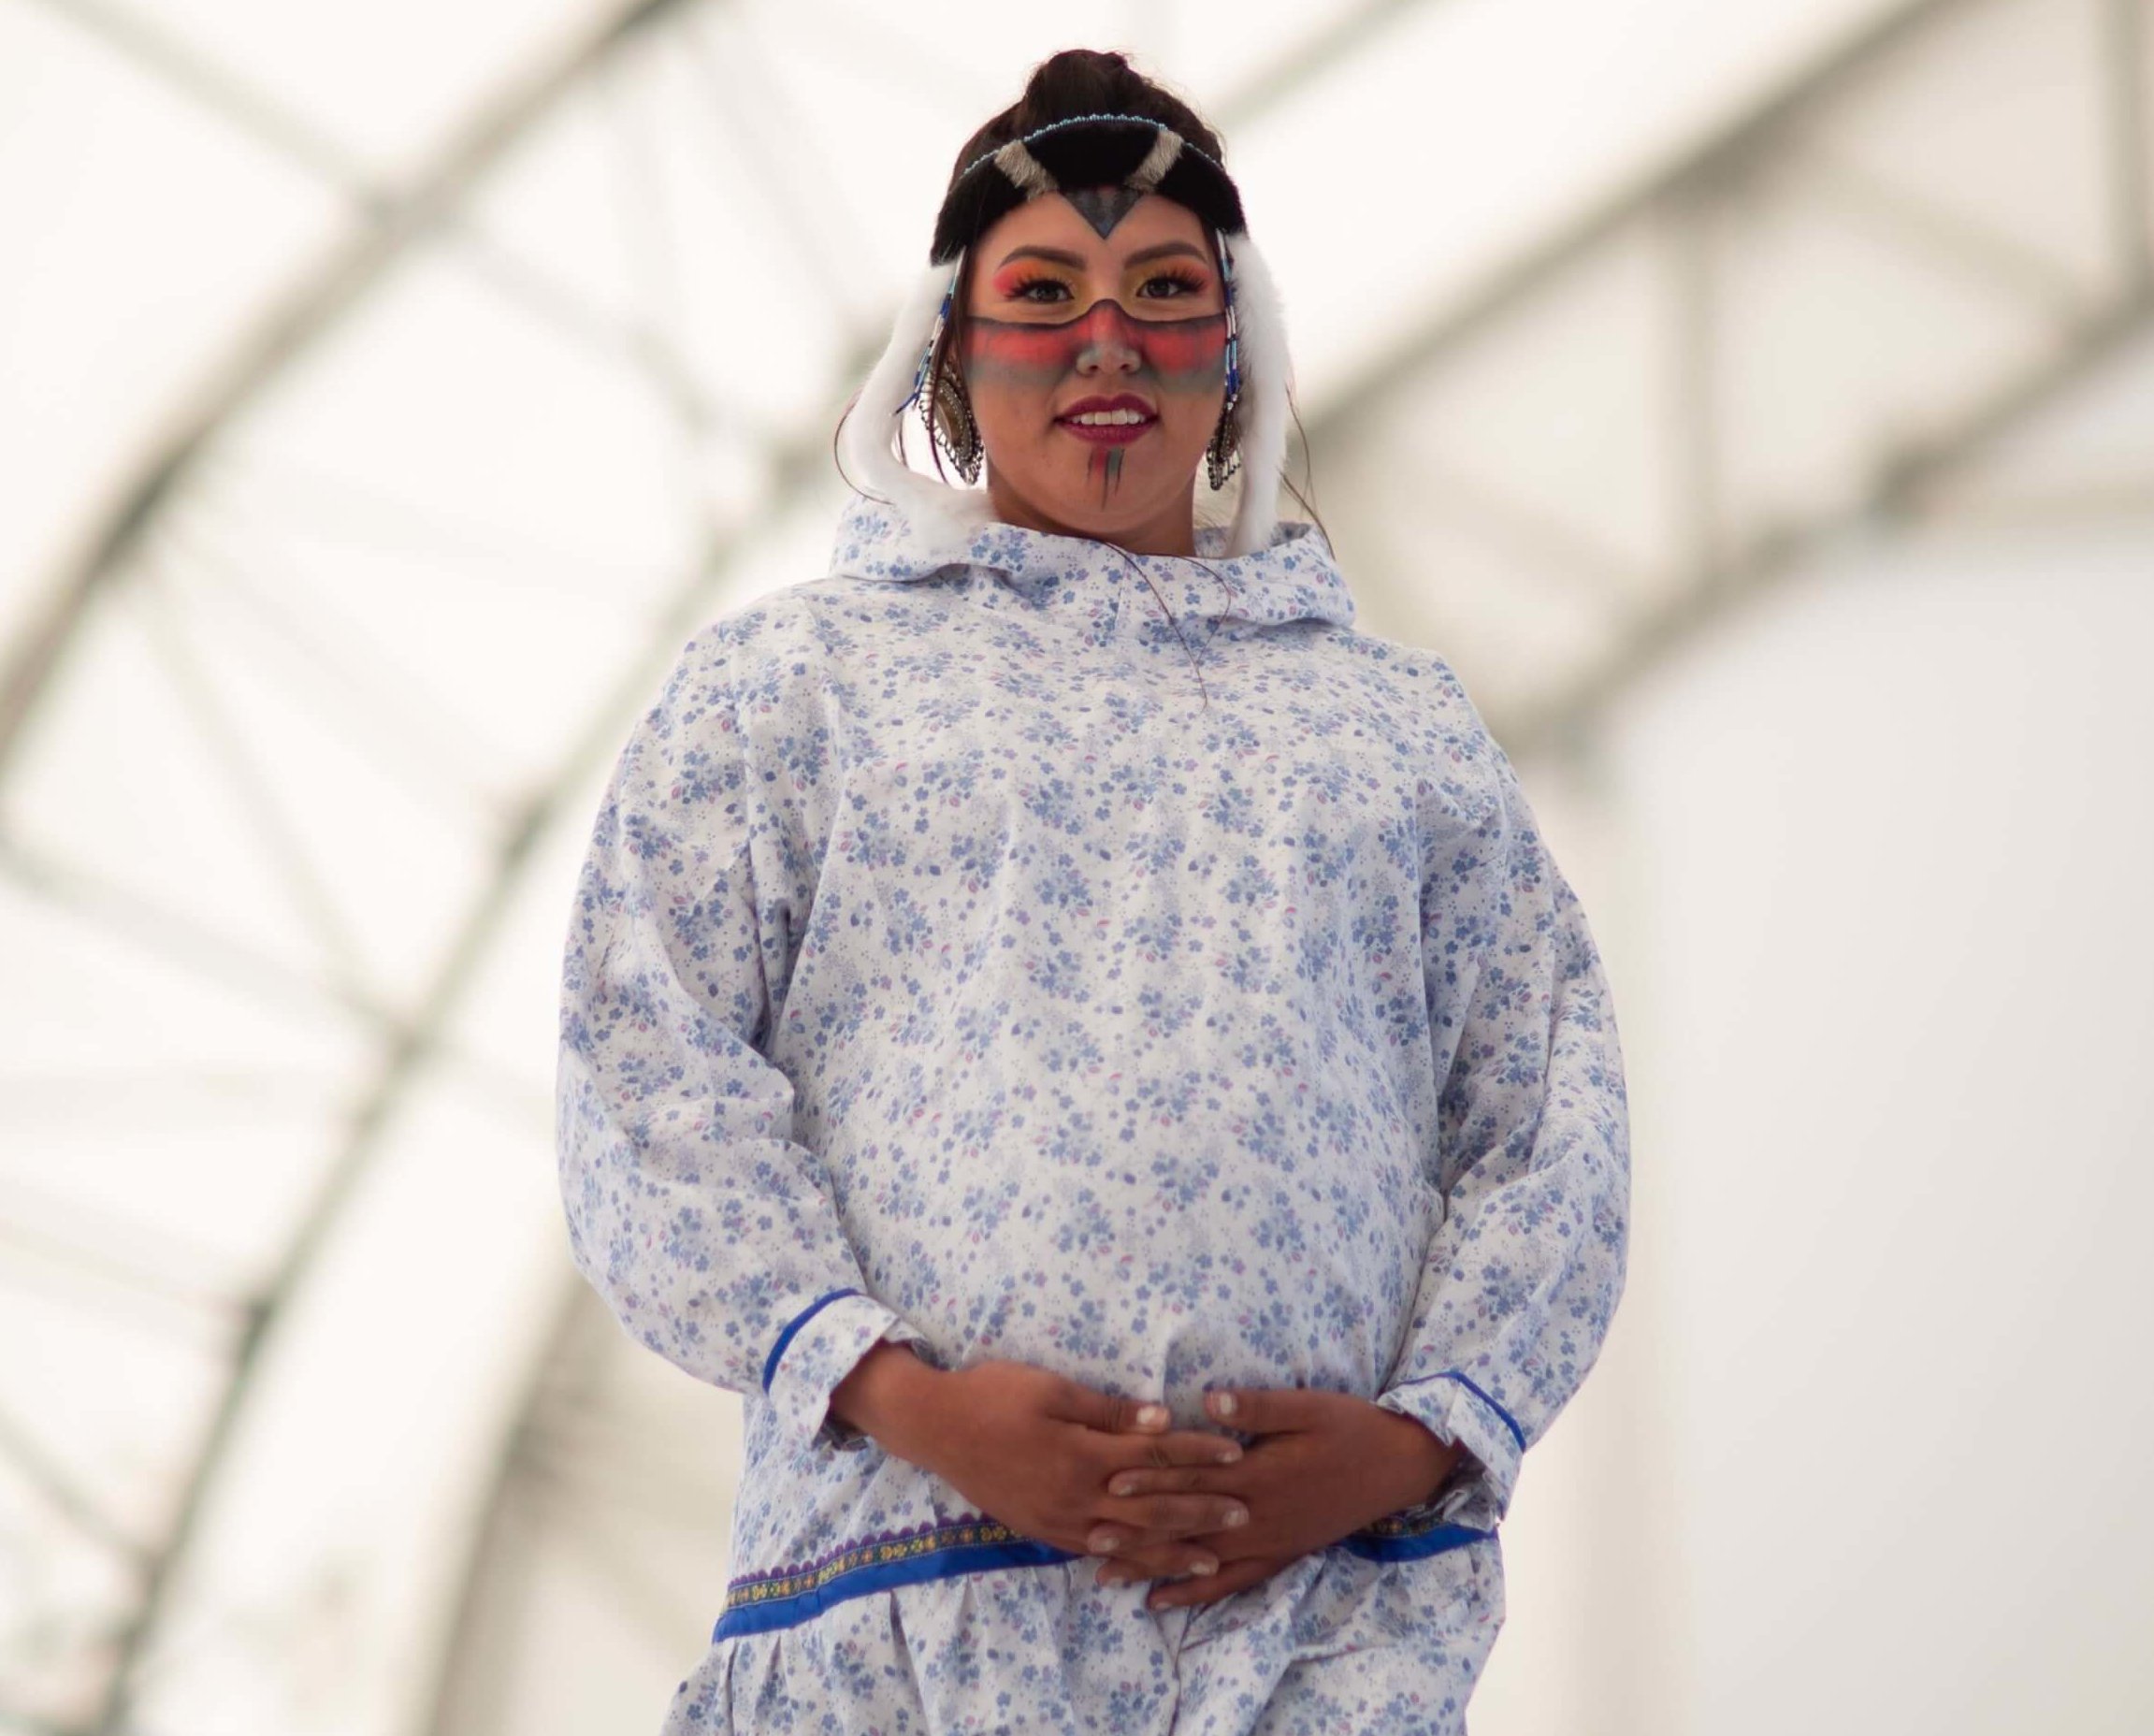 One-of-a-Kind Event Celebrates Art And Culture In Inuvik